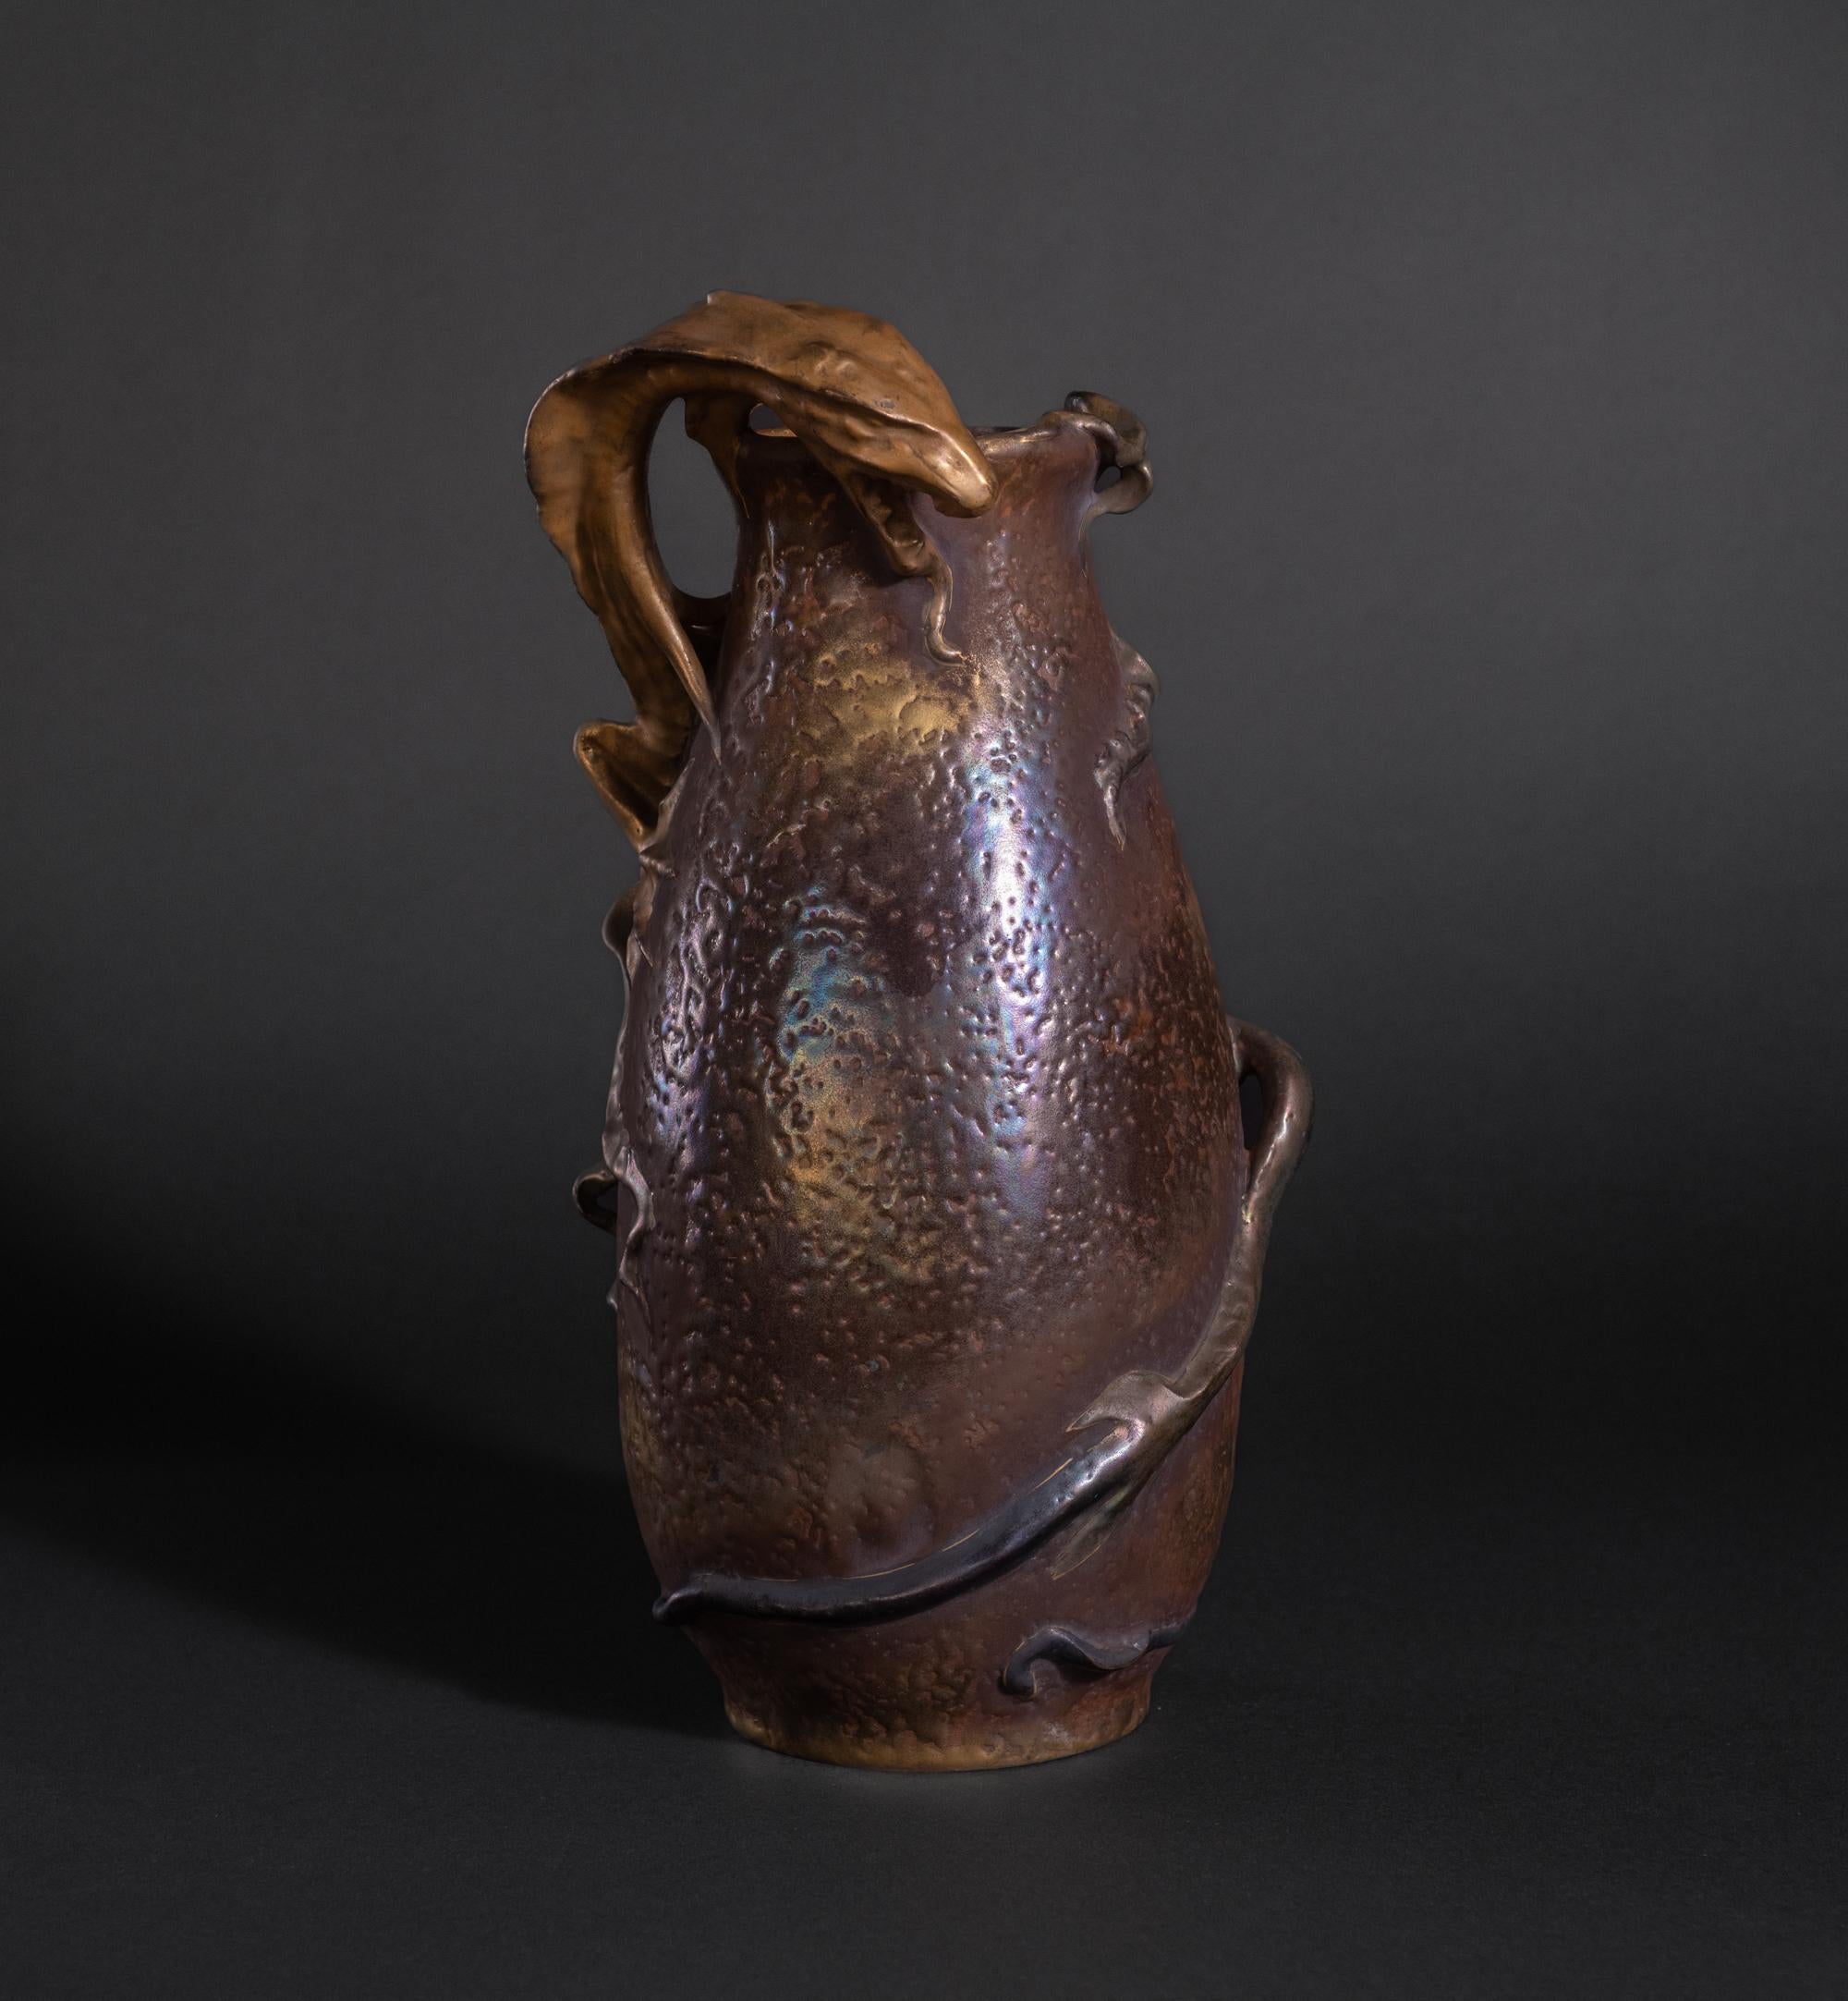 Model #4543

Riessner, Stellmacher and Kessel (RSt&K), consistently marked pieces with the tradename “Amphora” by the late 1890s and became known by that name. The Amphora pottery factory was located in Turn-Teplitz, Austria. By the mid-19th